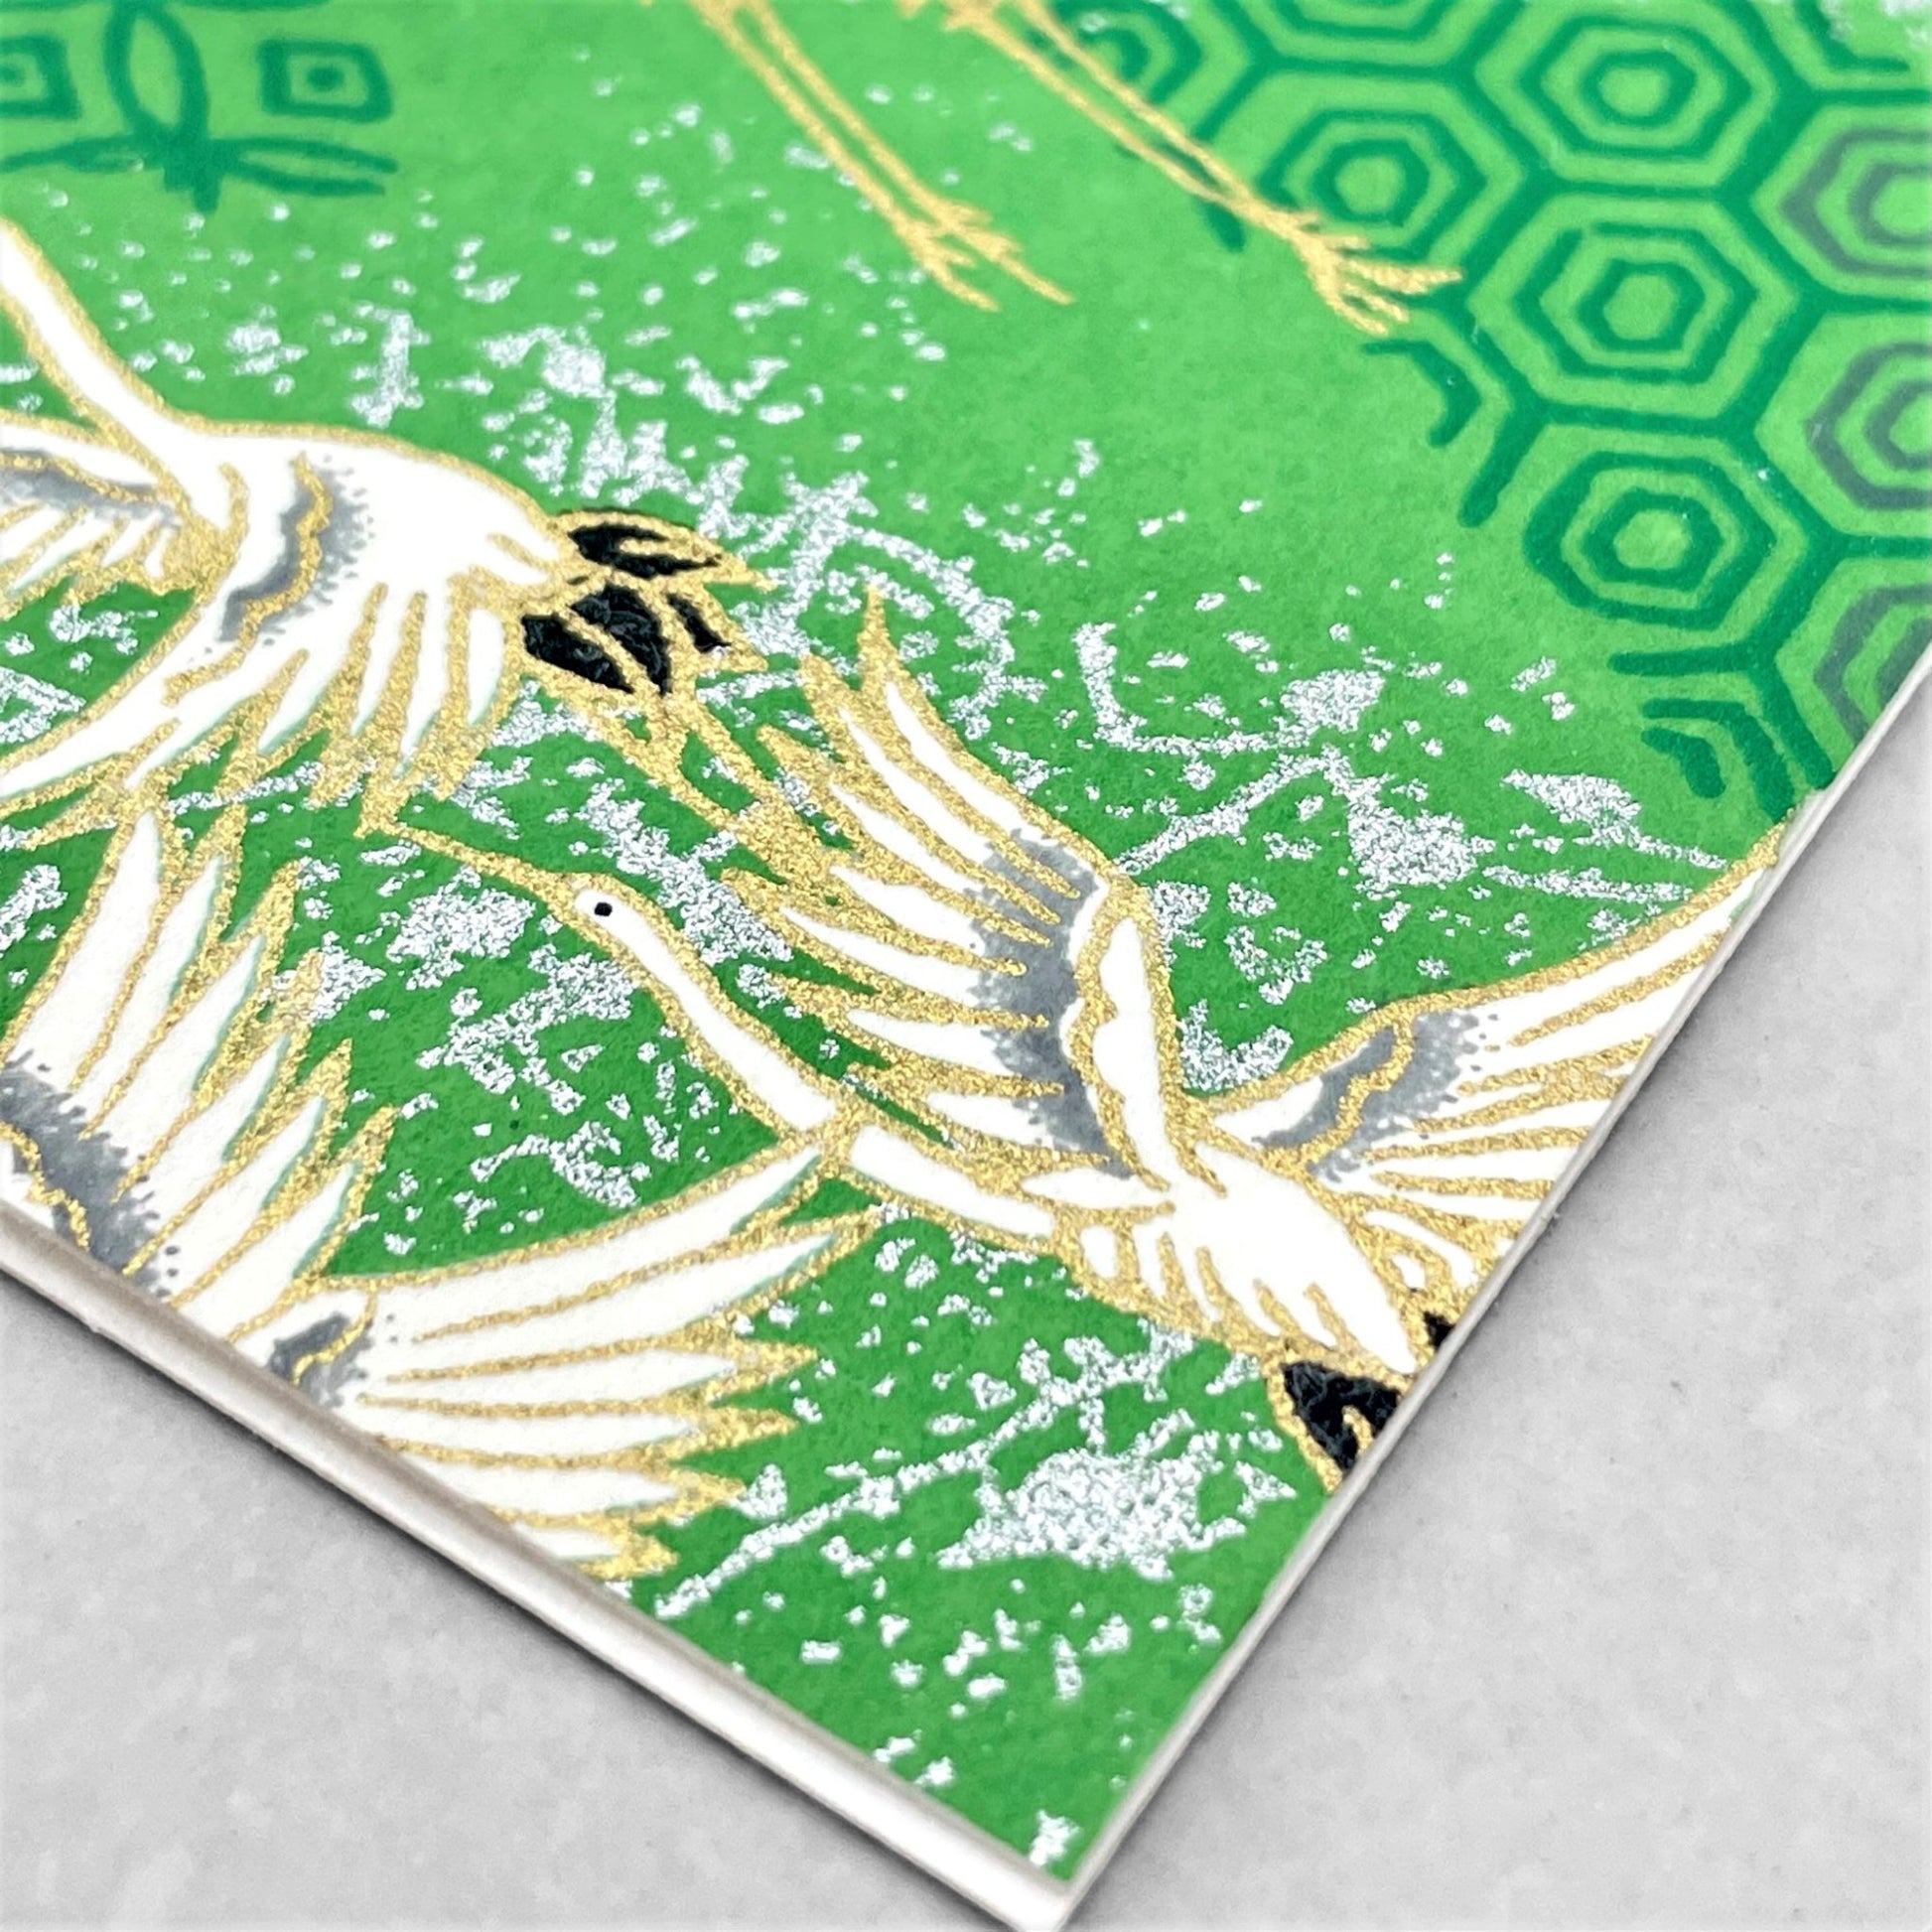 japanese silk-screen printed greetings card with a pattern of white cranes in flight on a green backdrop of japanese motifs by Esmie